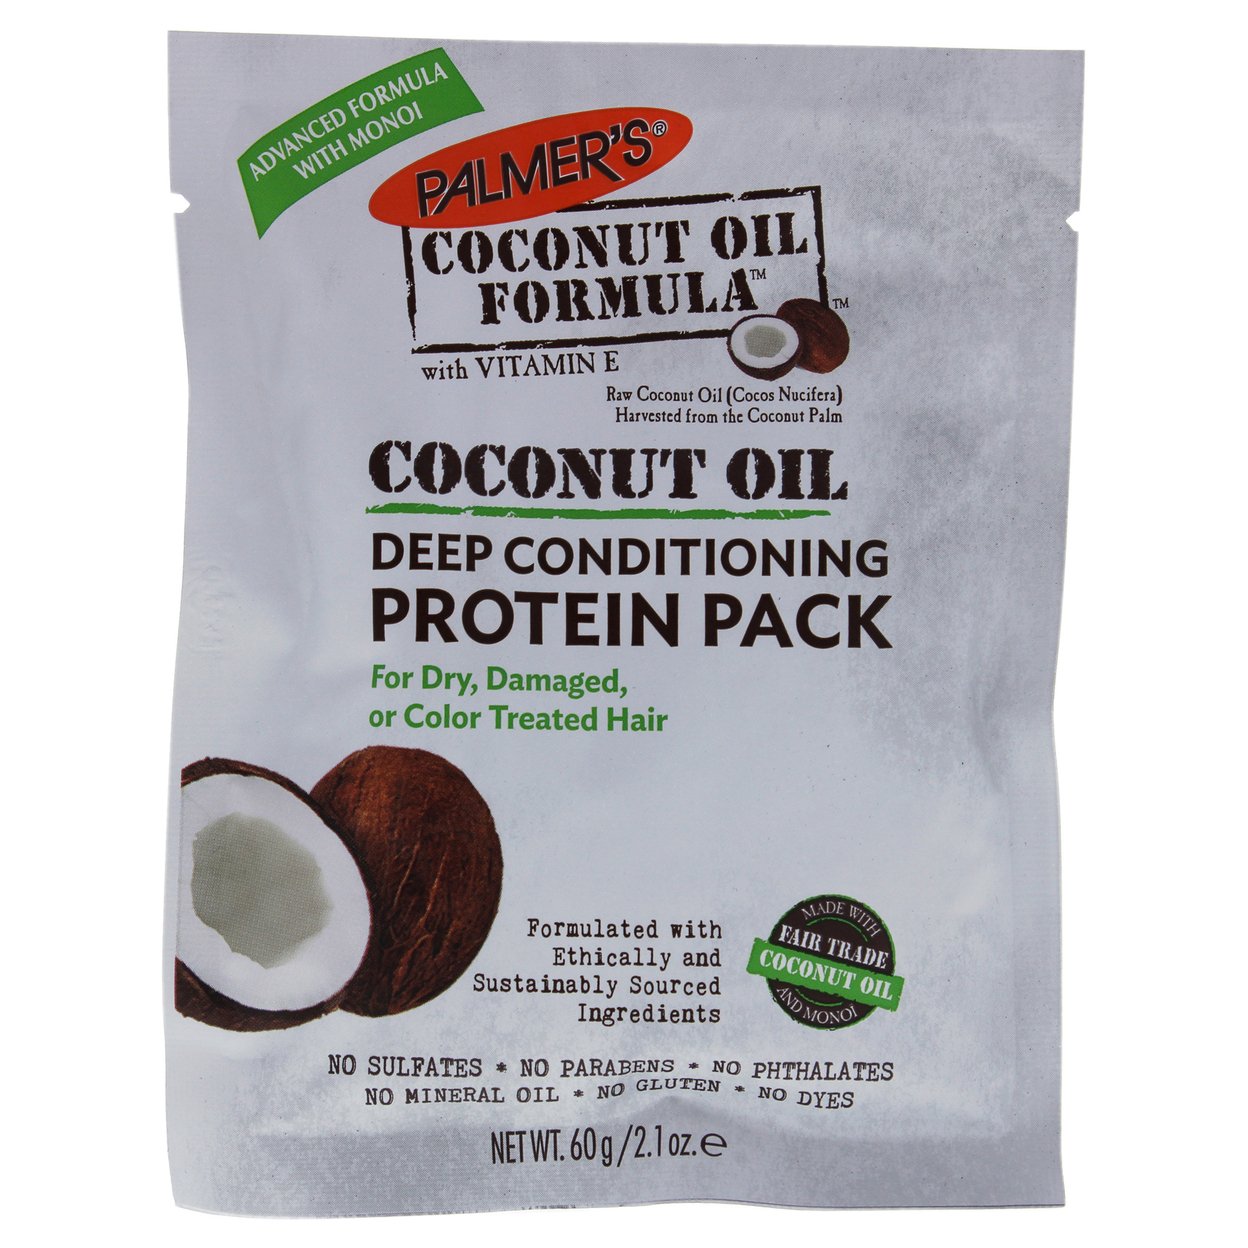 Palmers Coconut Oil Deep Conditioning Protein Pack Conditioner 2.1 Oz